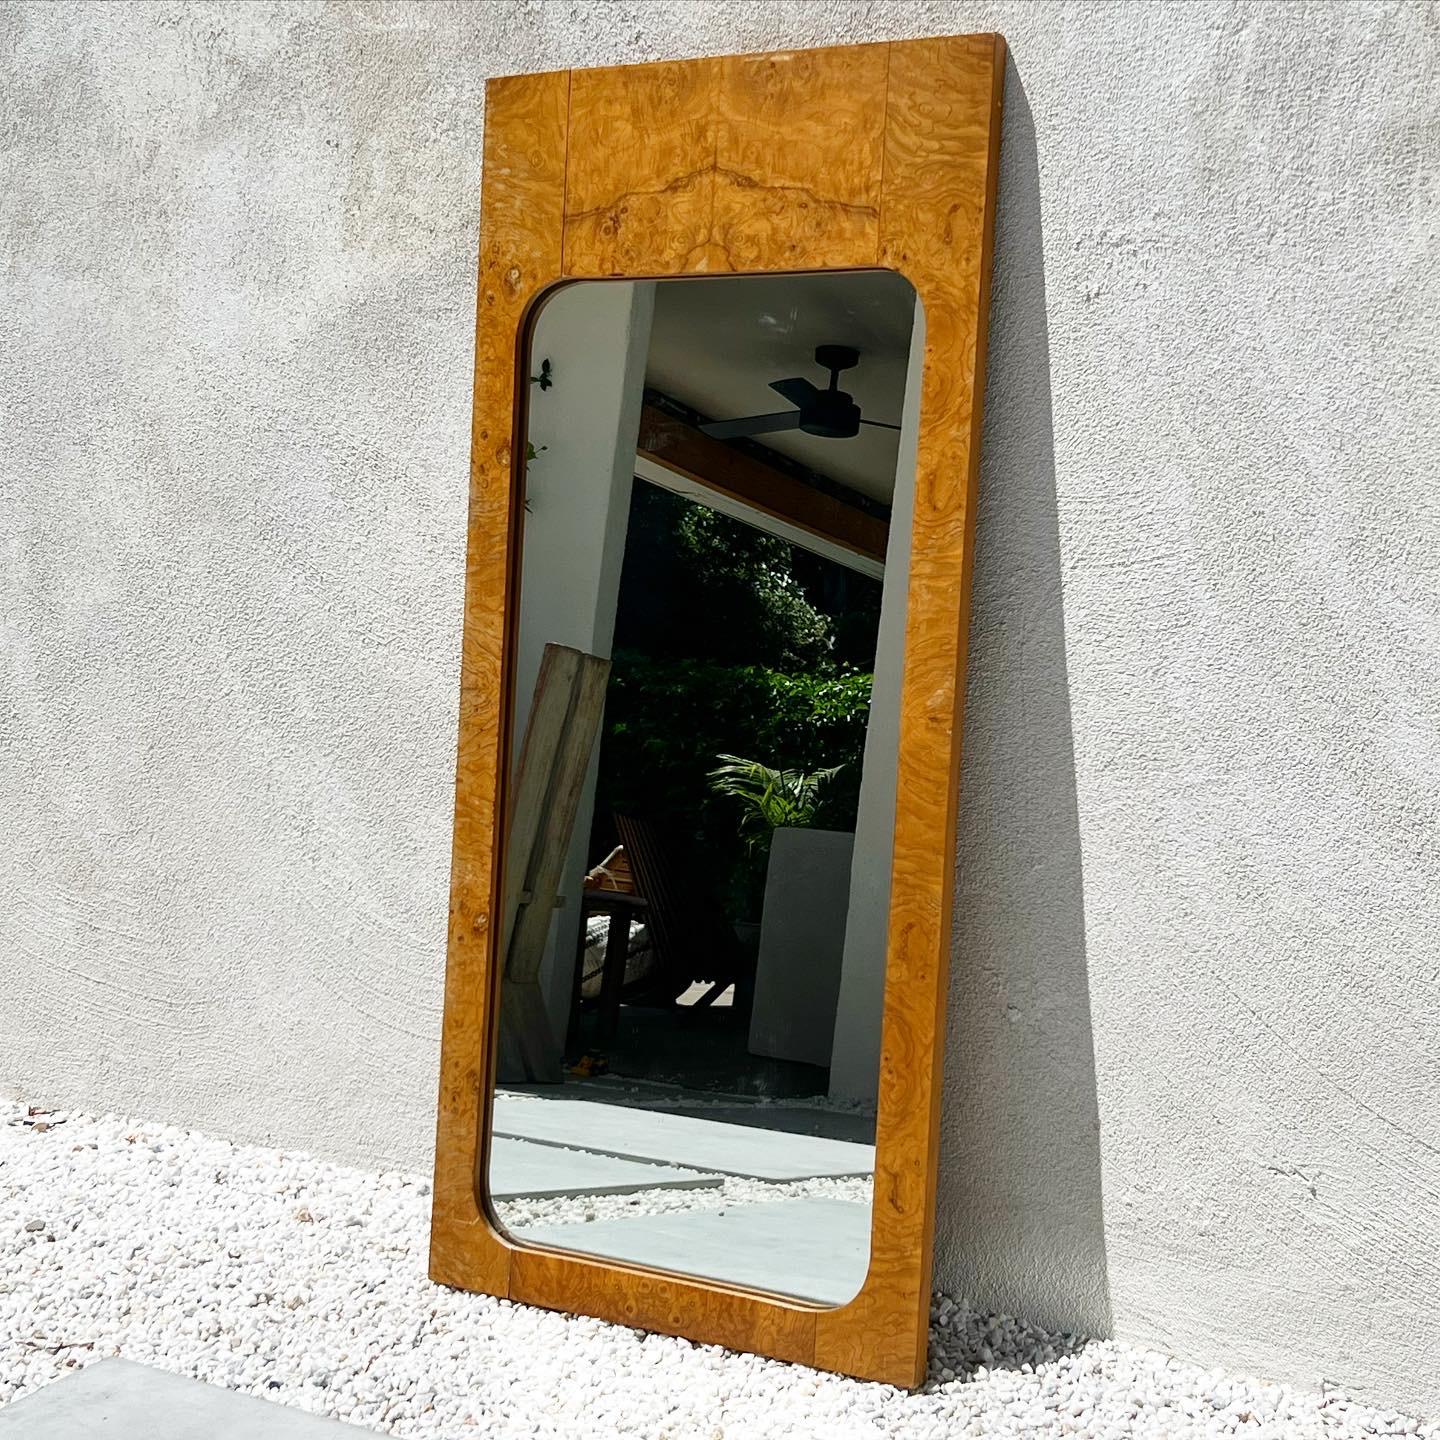 A Mid-Century Modern burl wood « Alpha » mirror by Lane, circa late 1960s or early 1970s. Minor signs of age, most significantly some separating of the wood which does not compromise the structural integrity of the piece, but overall fabulous